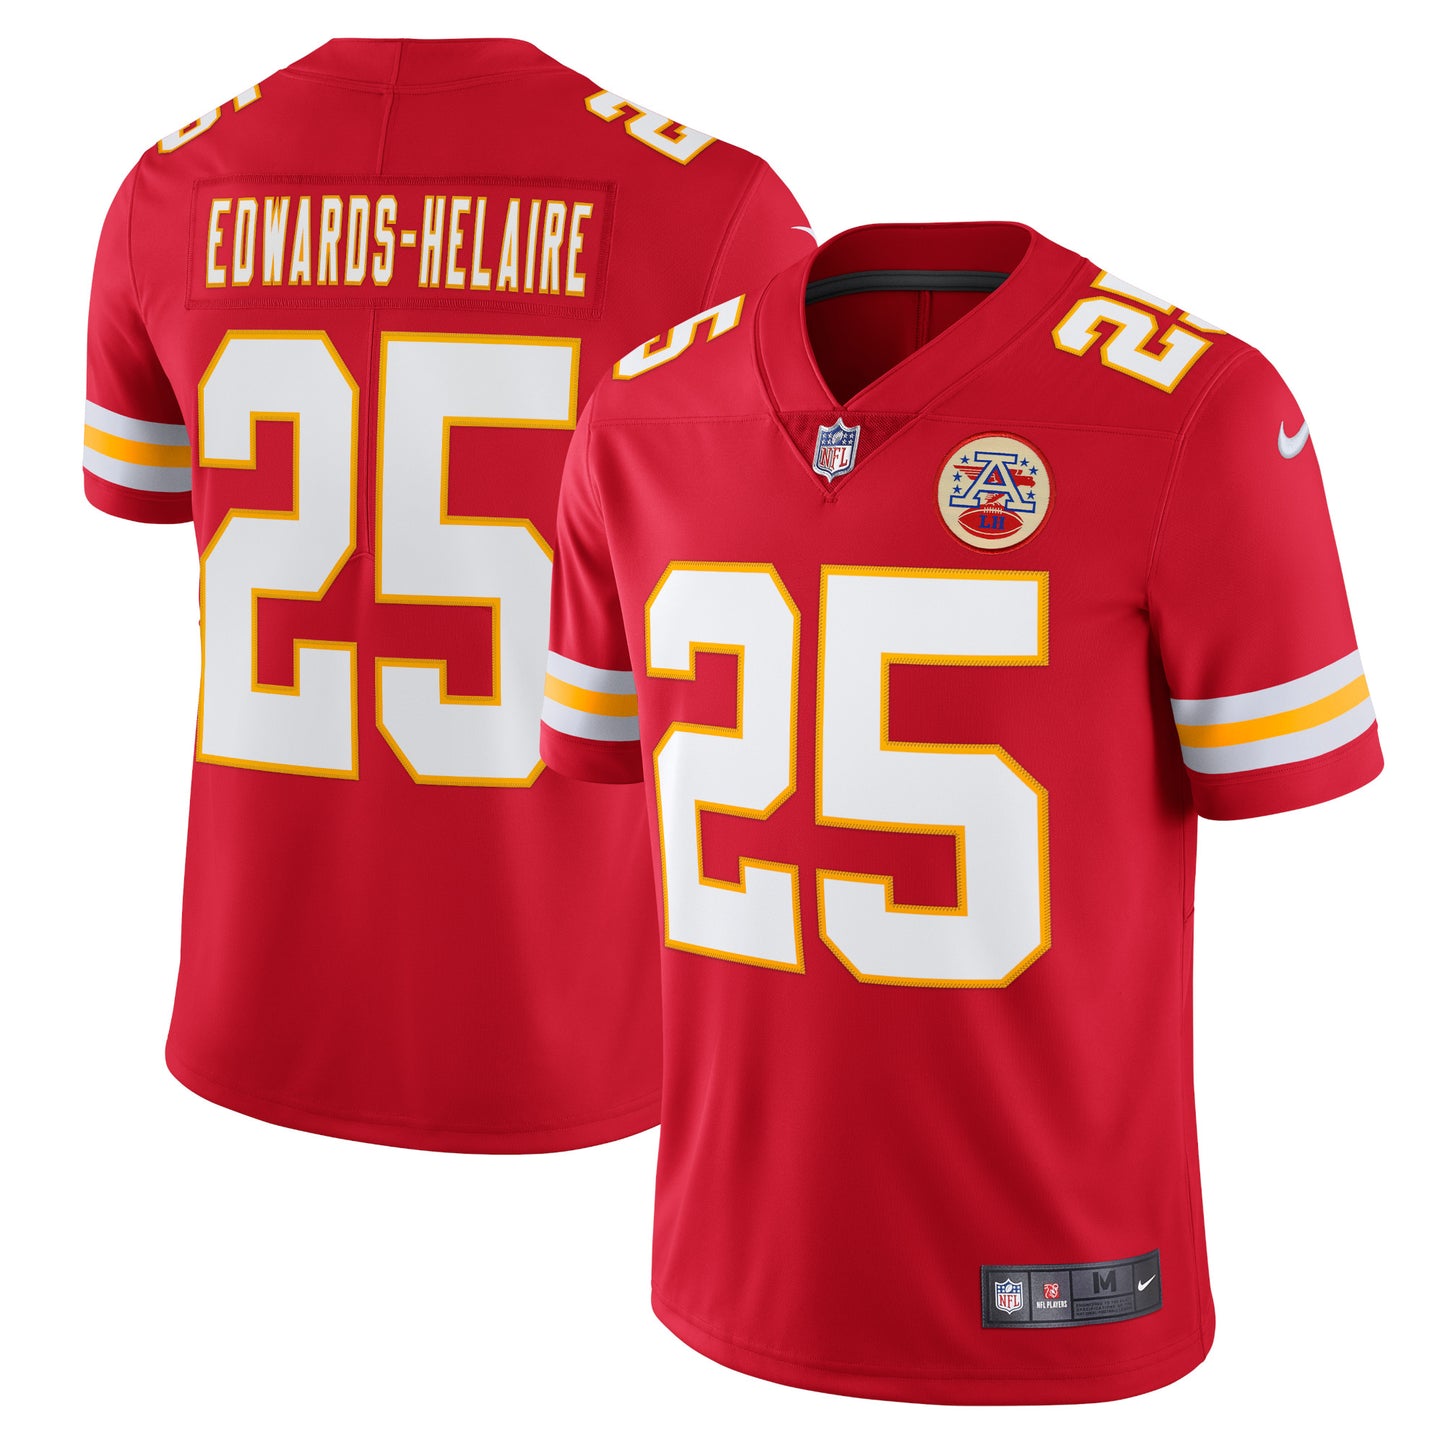 Clyde Edwards-Helaire Kansas City Chiefs Nike Vapor Limited Jersey - Red